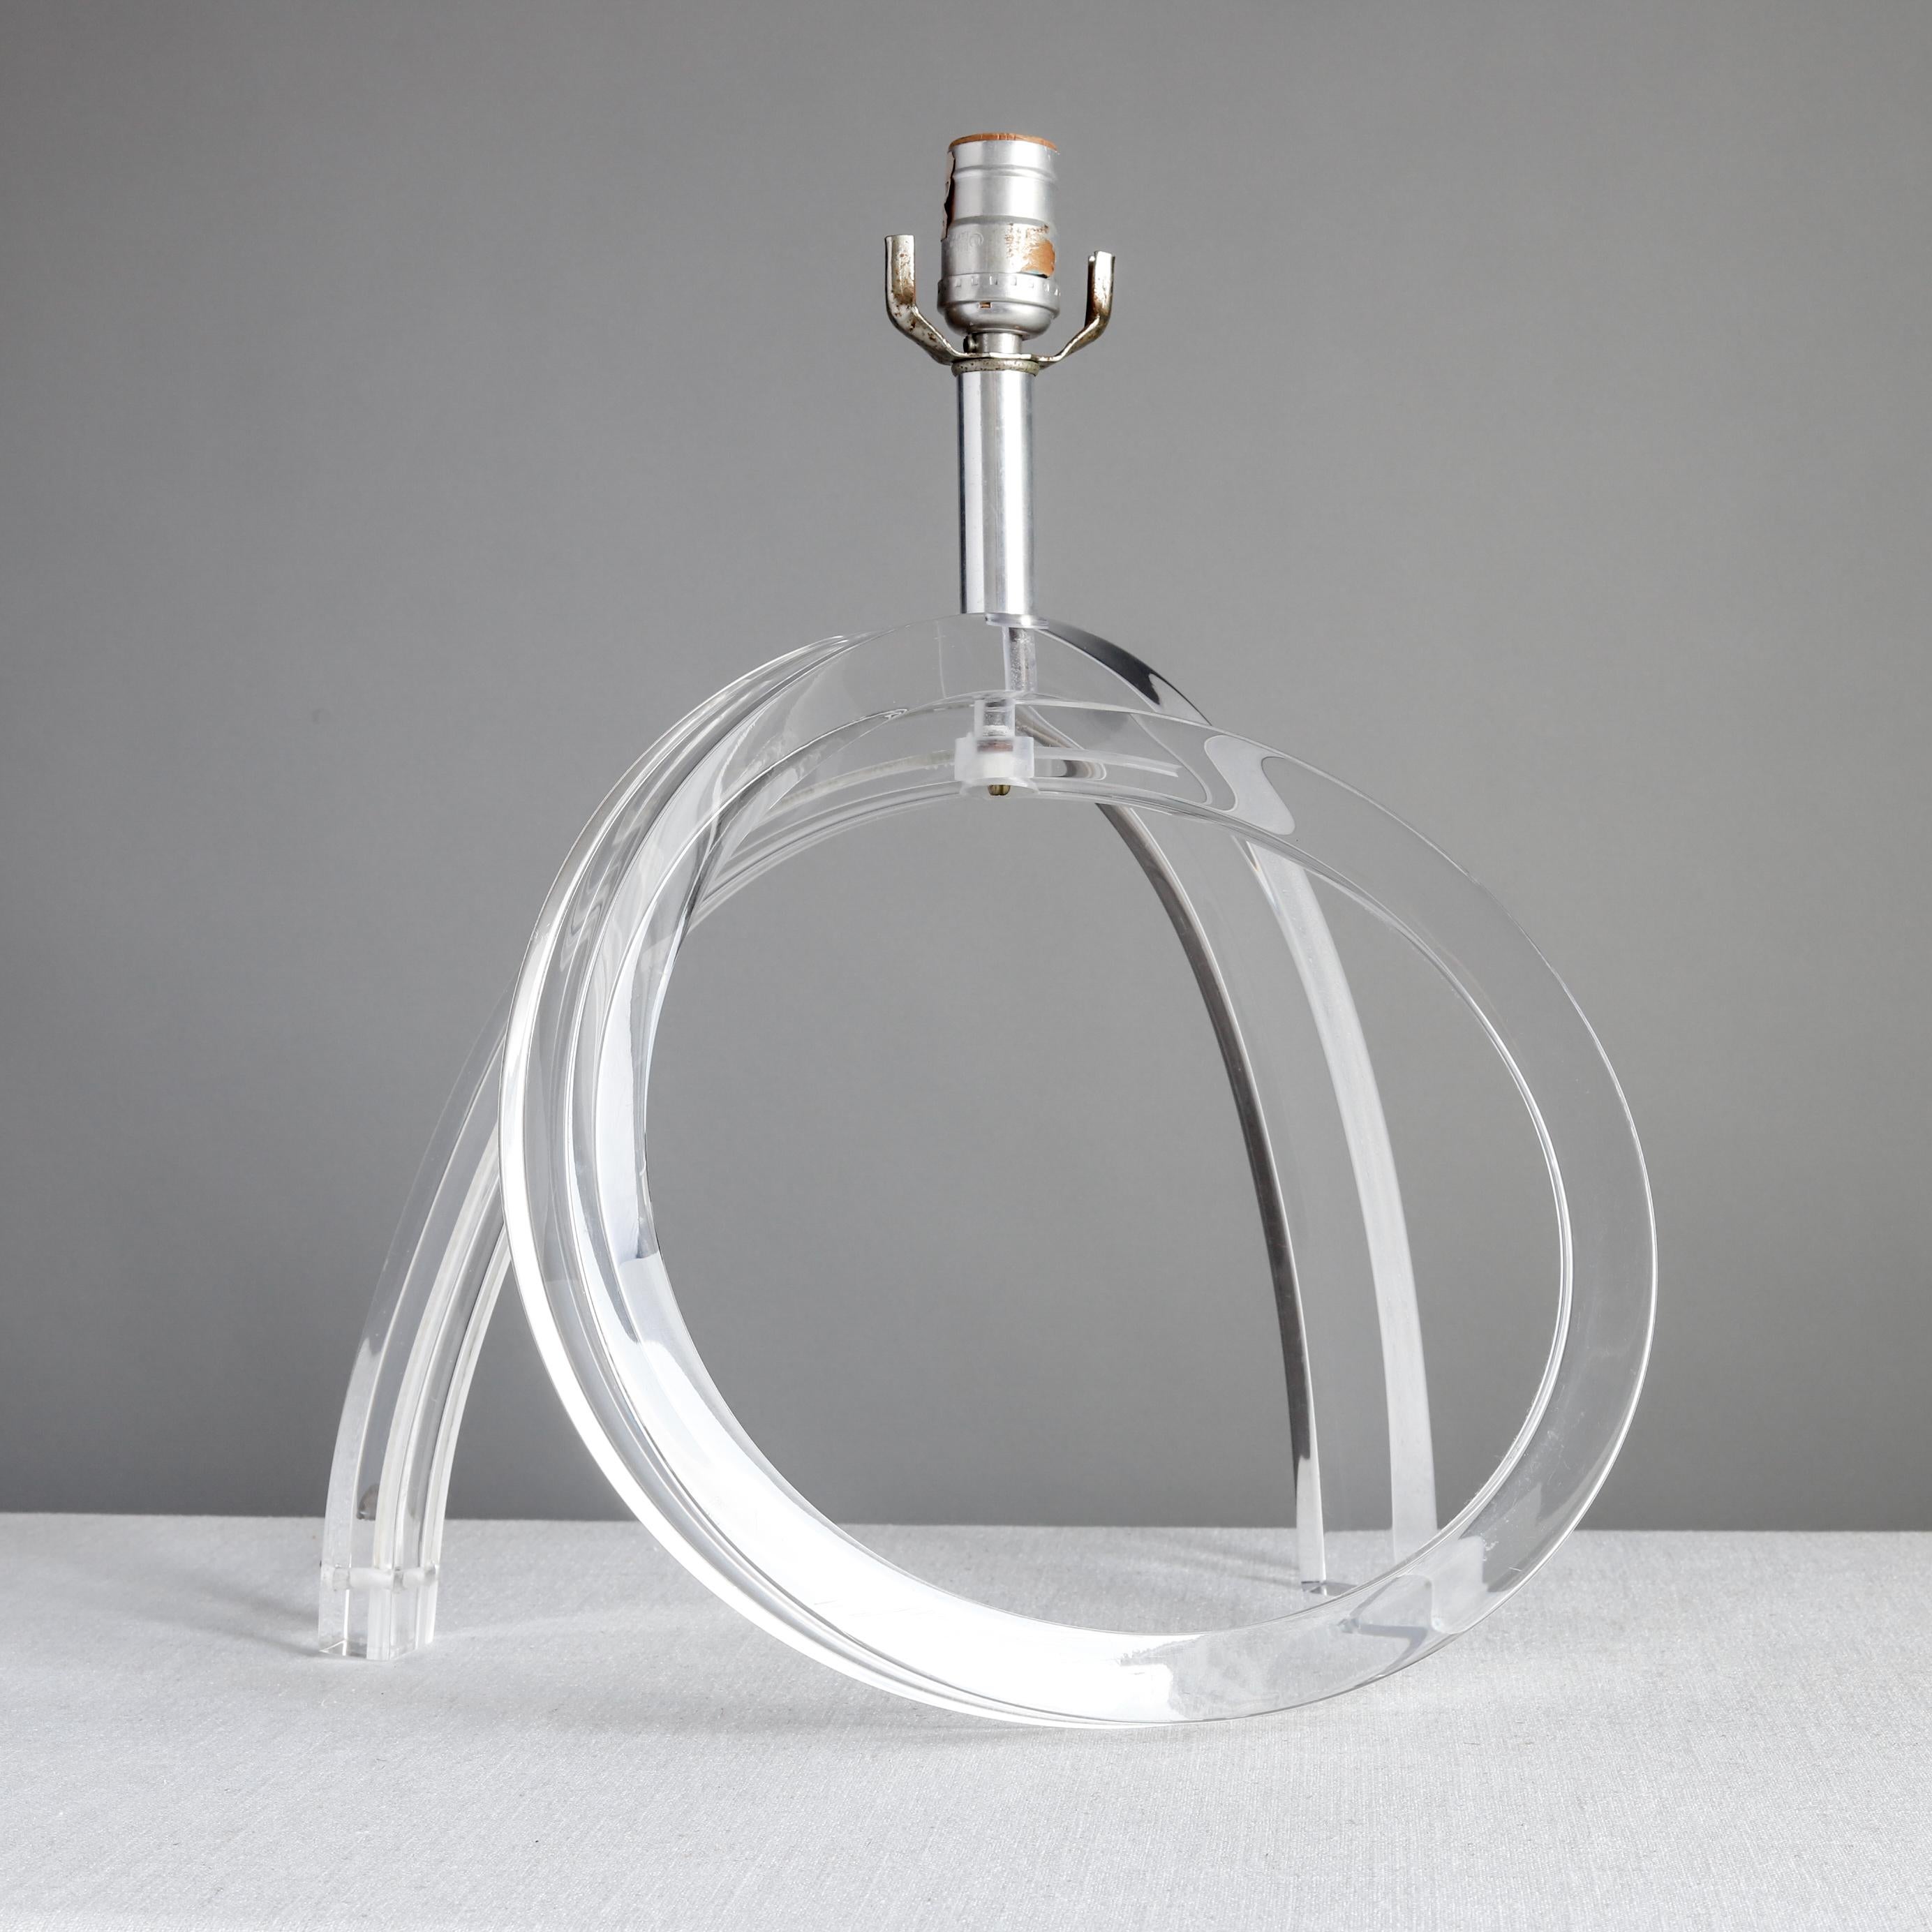 Pair of clear acrylic table lamps by Astrolite Products of Los Angeles, California. Astrolite was a term trademarked by company founder Herb Ritts, Sr., the father of the fashion photographer Herb Ritts, Jr. The cord runs down a groove in the back